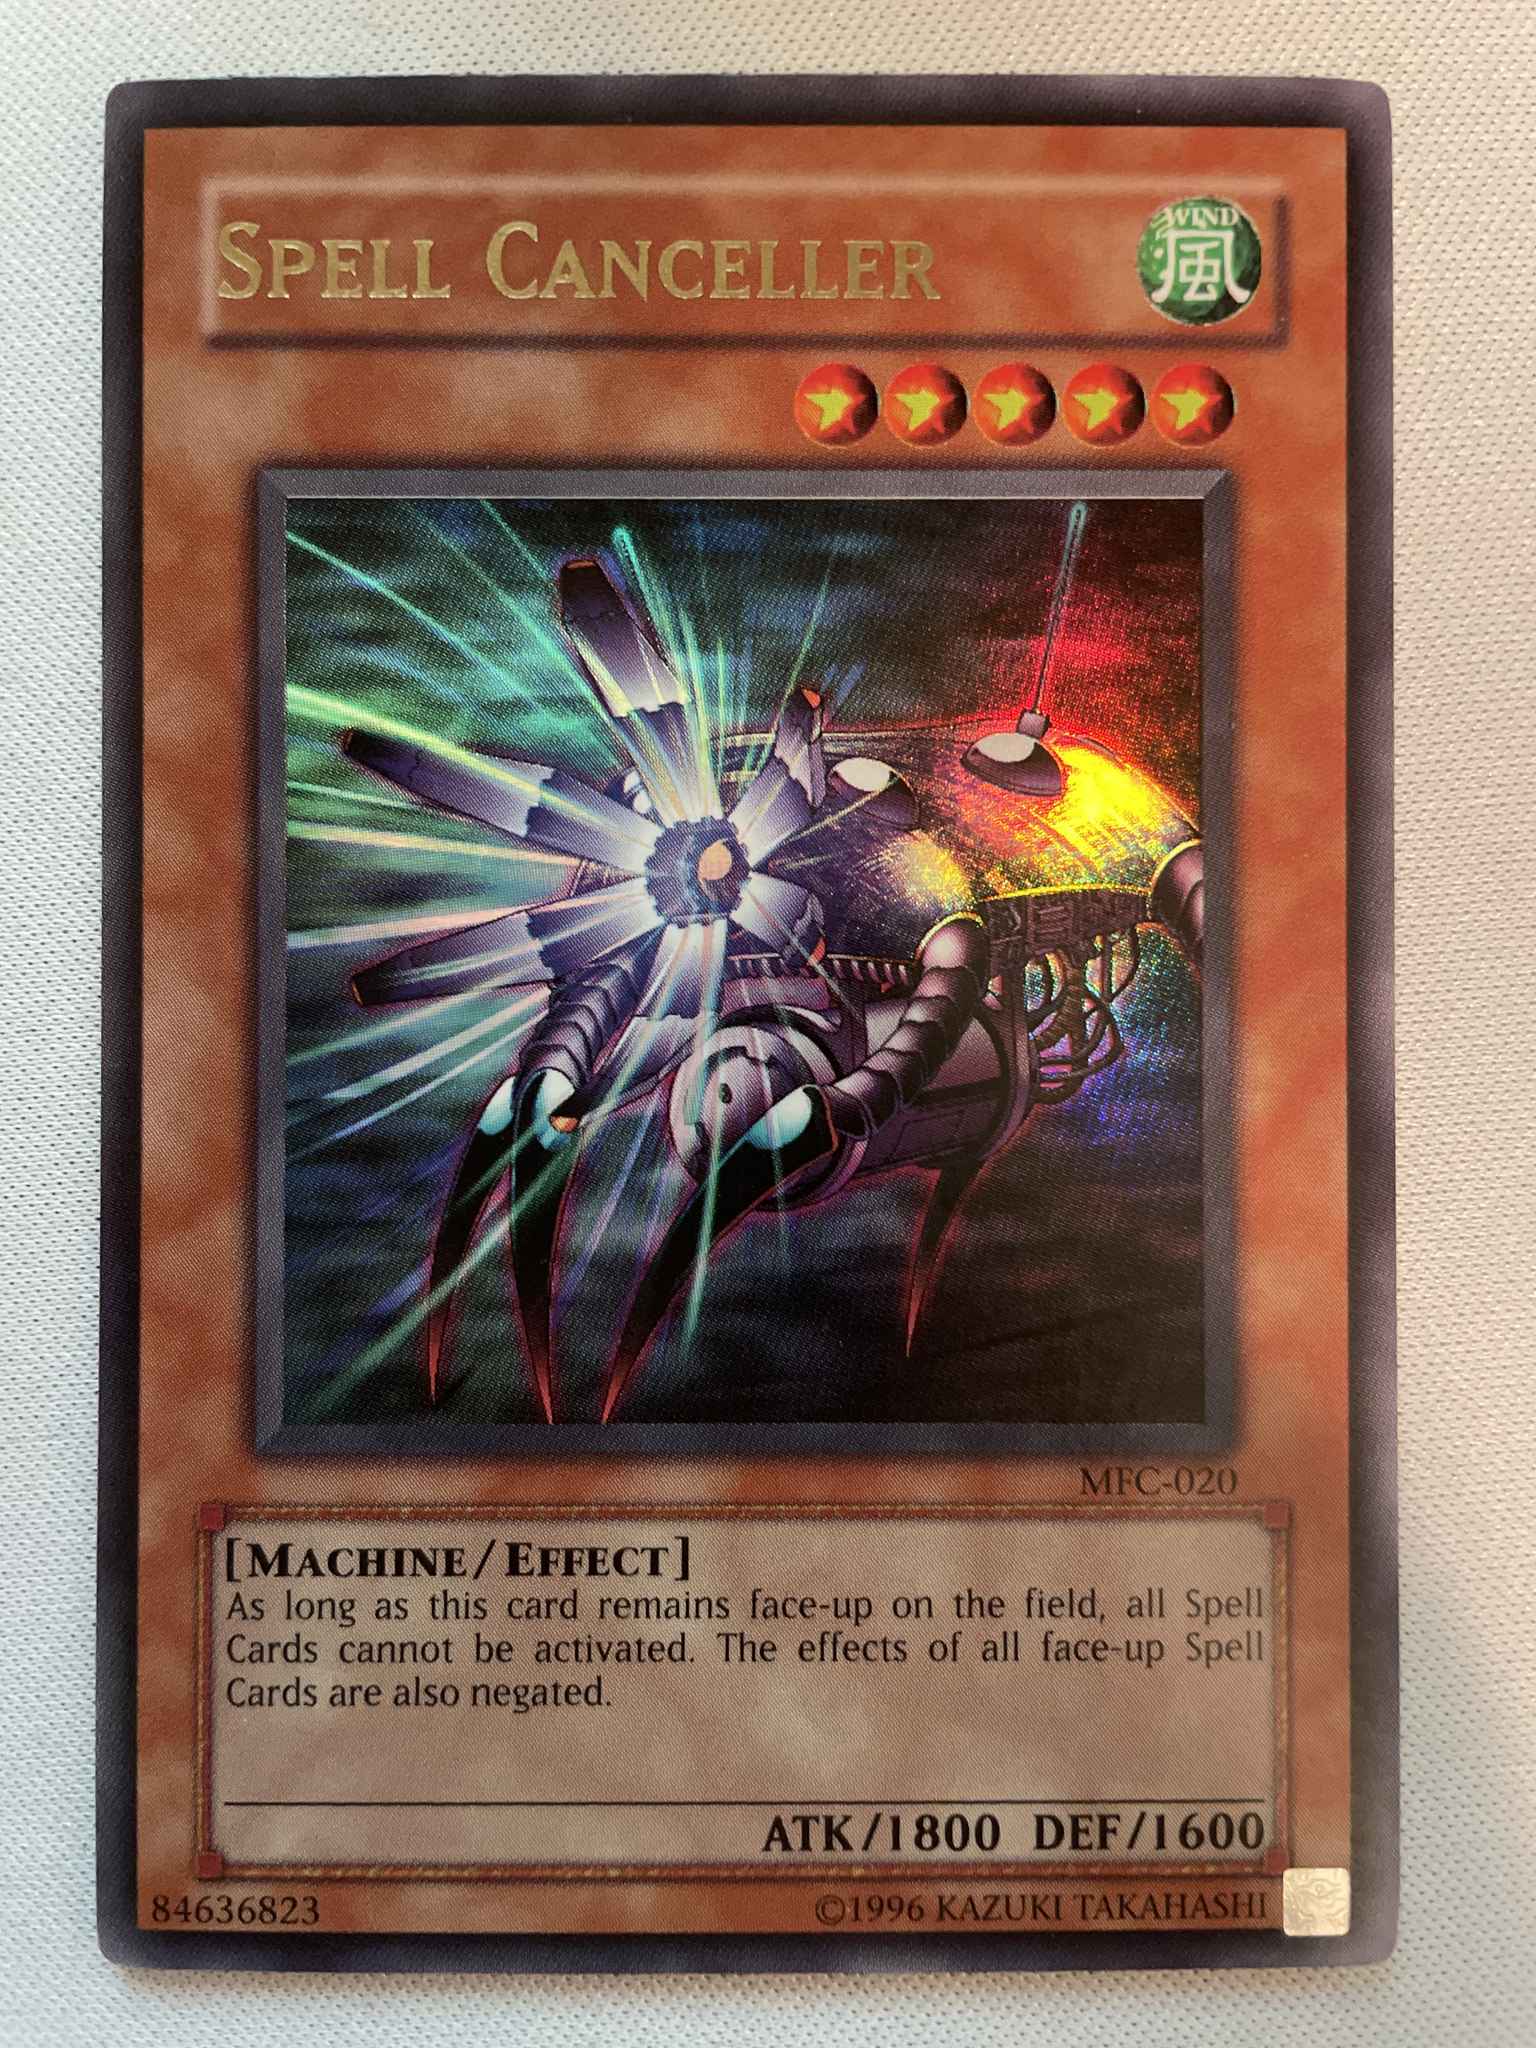 Yugioh Spell Canceller Unlimited MFC-020 Ultra Rare Very Lightly Played!